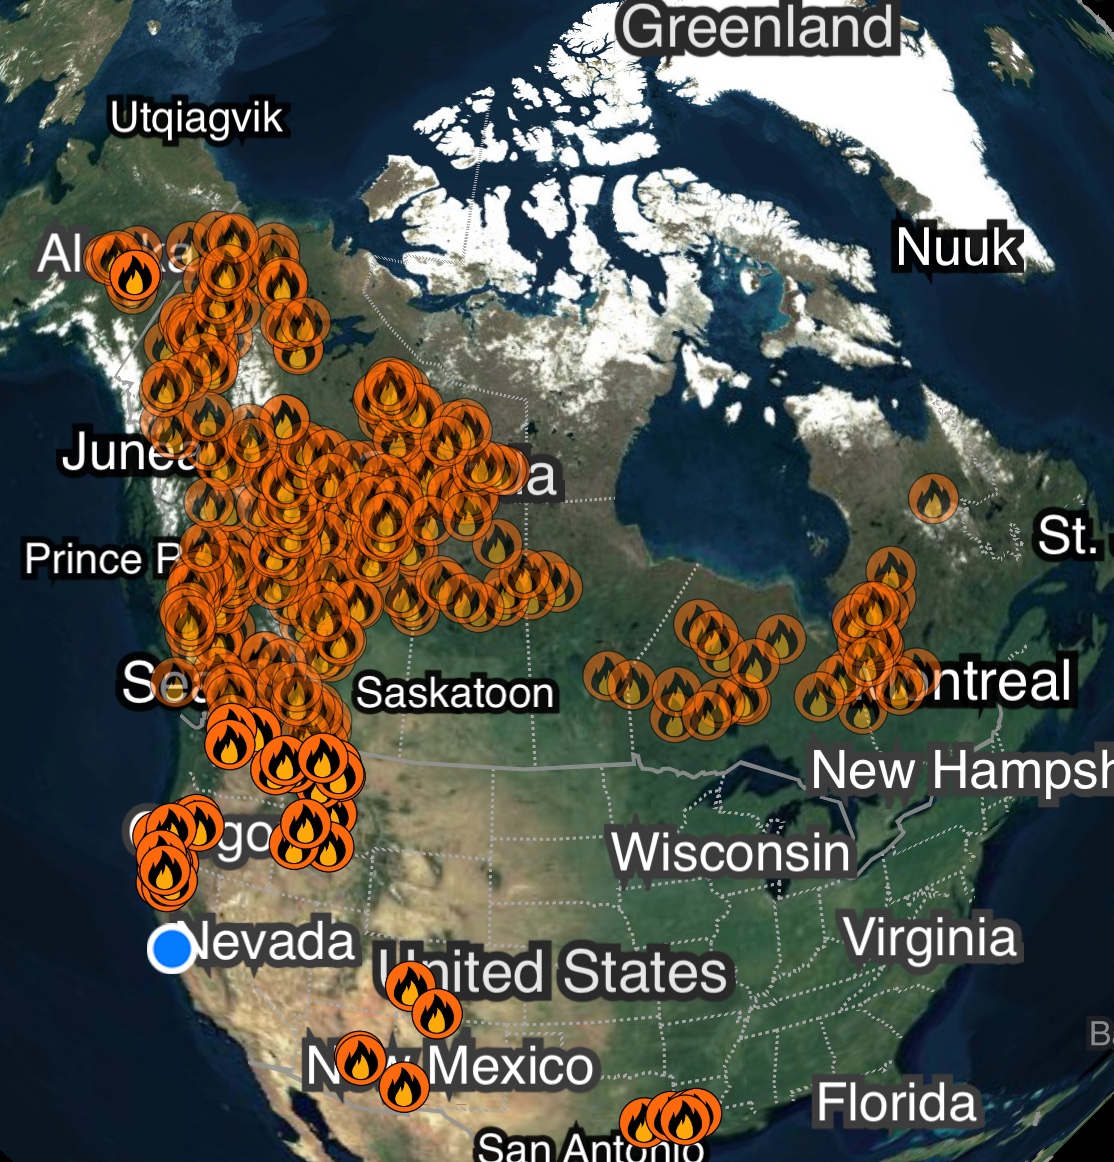 The 2023 Canadian wildfire season has been unprecedented: - 5% of Canada's forest area burned - 43 million acres of forest scorched, greater than the size of Florida - 3x more carbon produced than previous record wildfire year - 2.5x more acres burned than previous record year